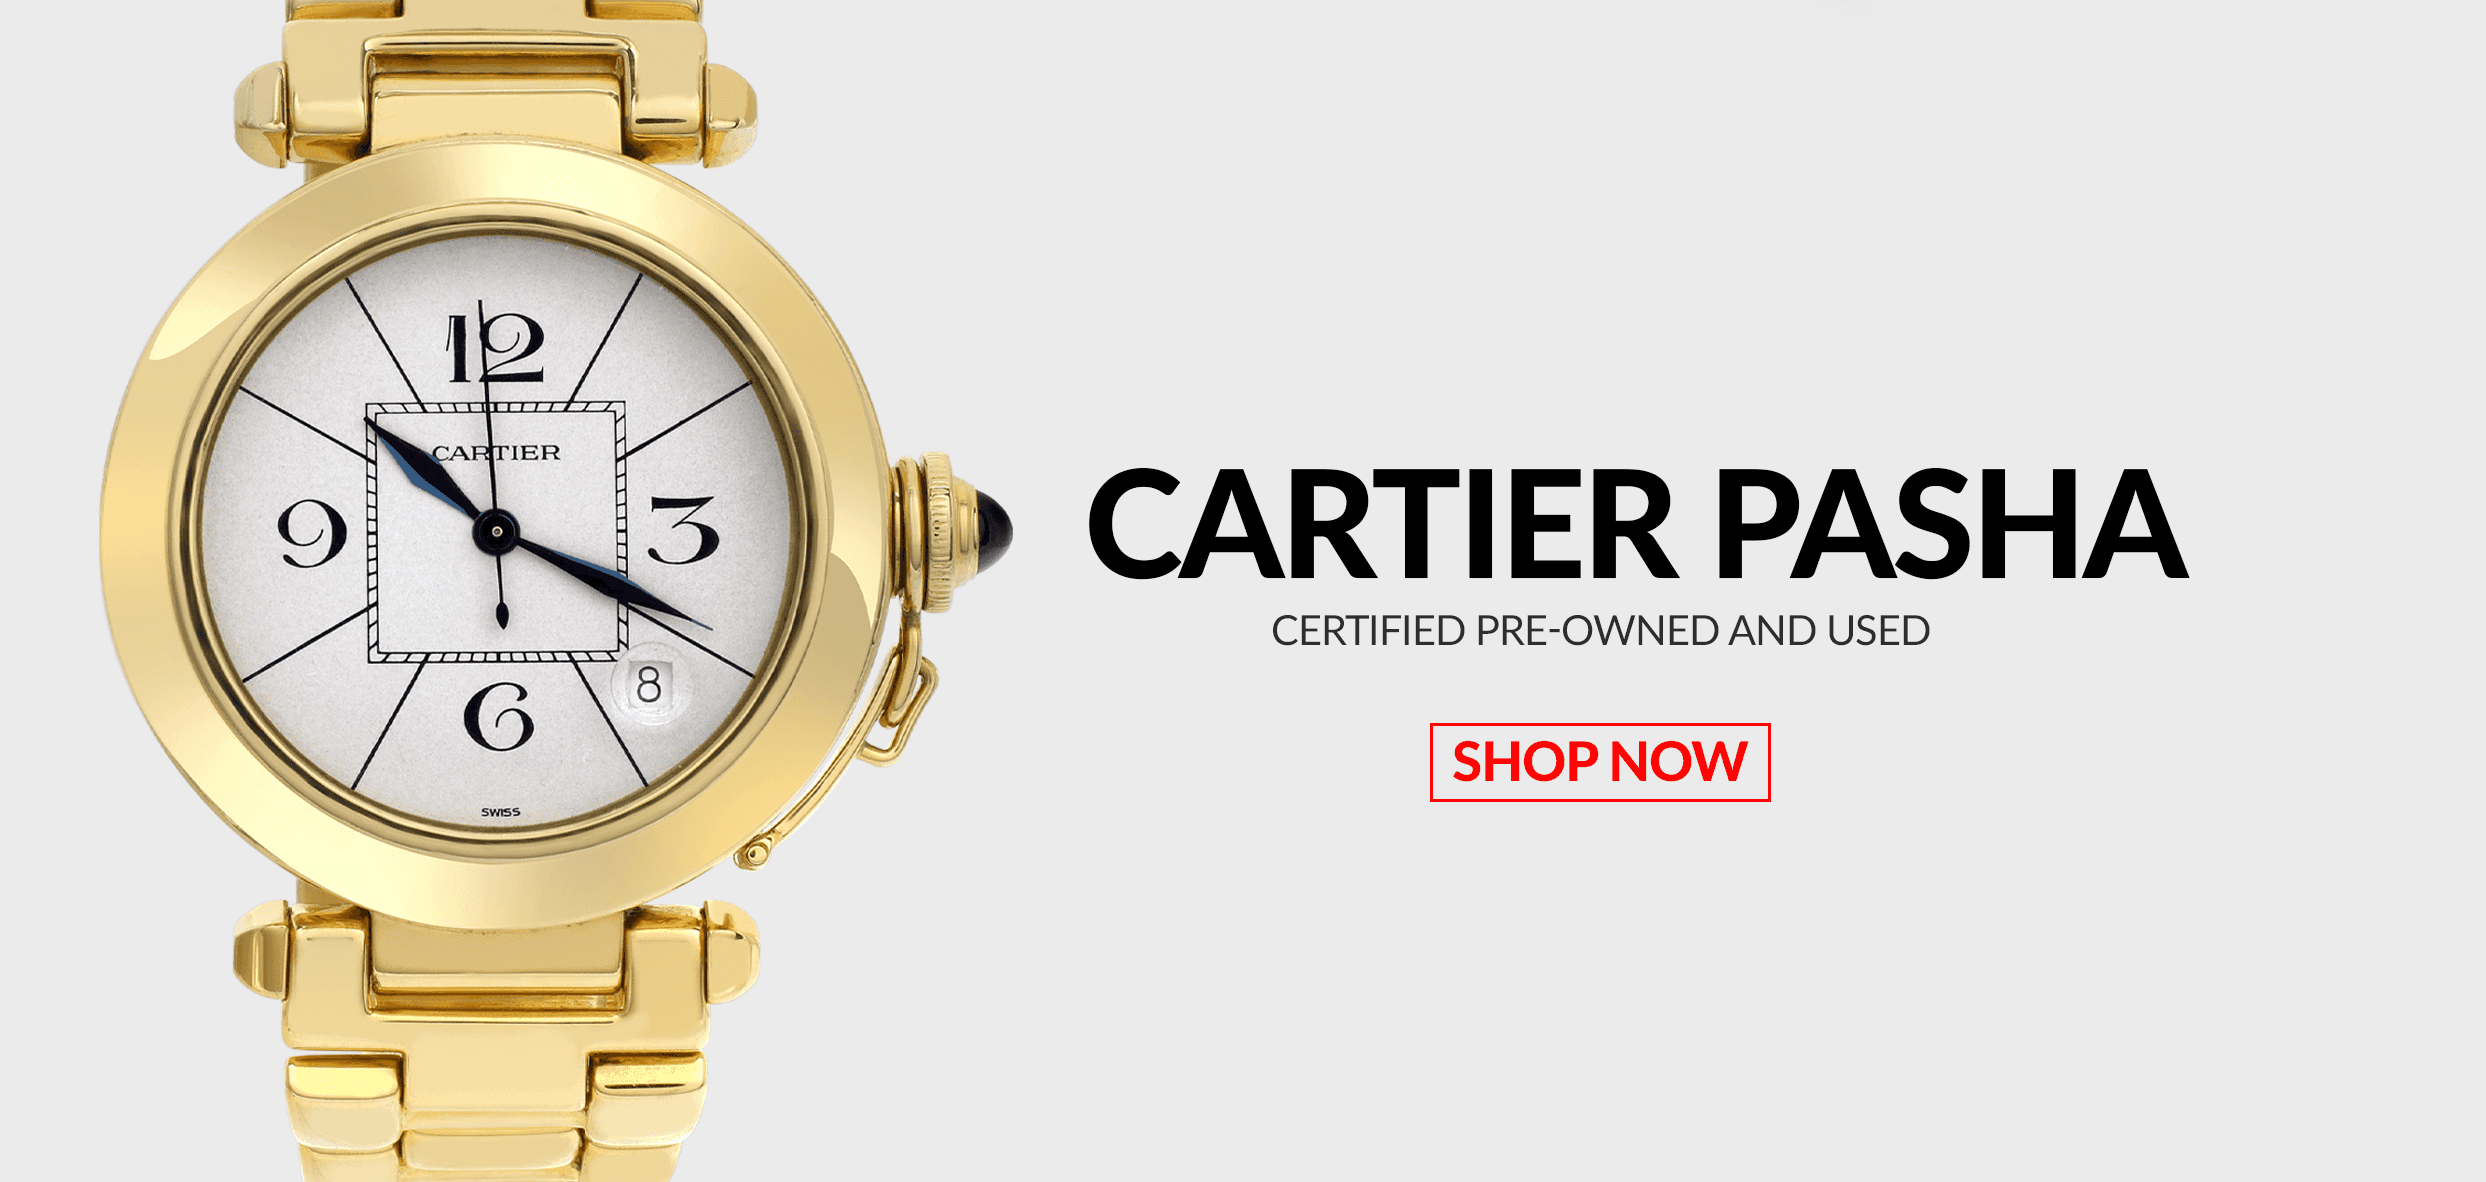 Pre-Owned Certified Used Cartier Pasha Header